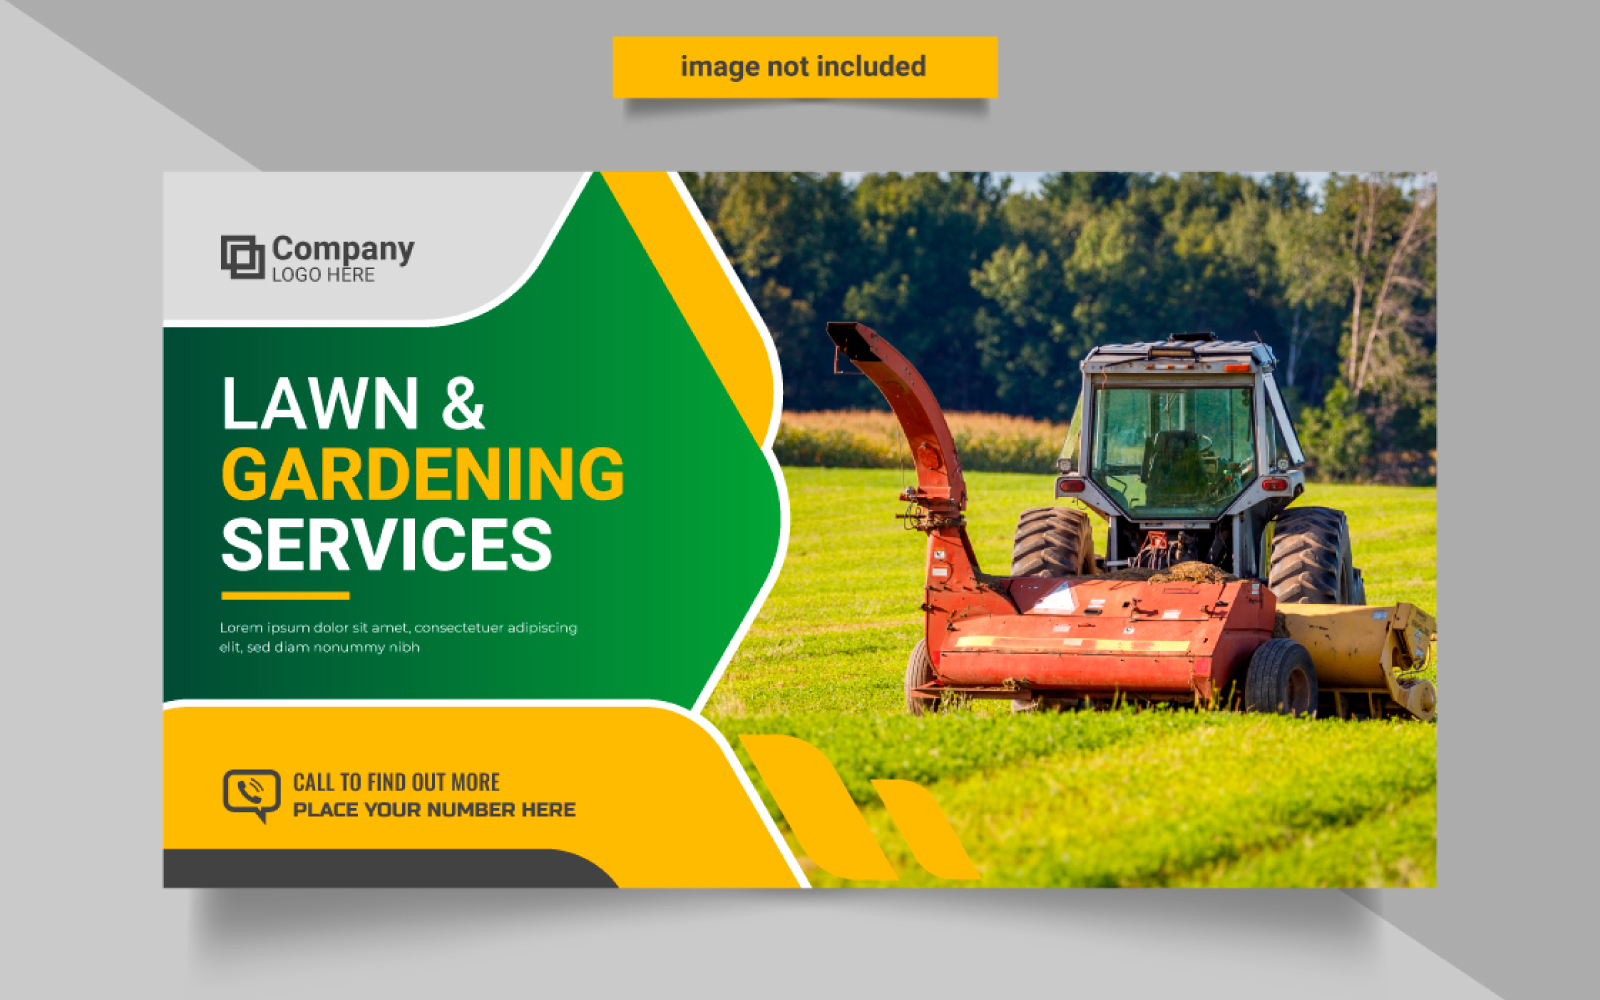 Agro farm and landscaping business web banner design vector